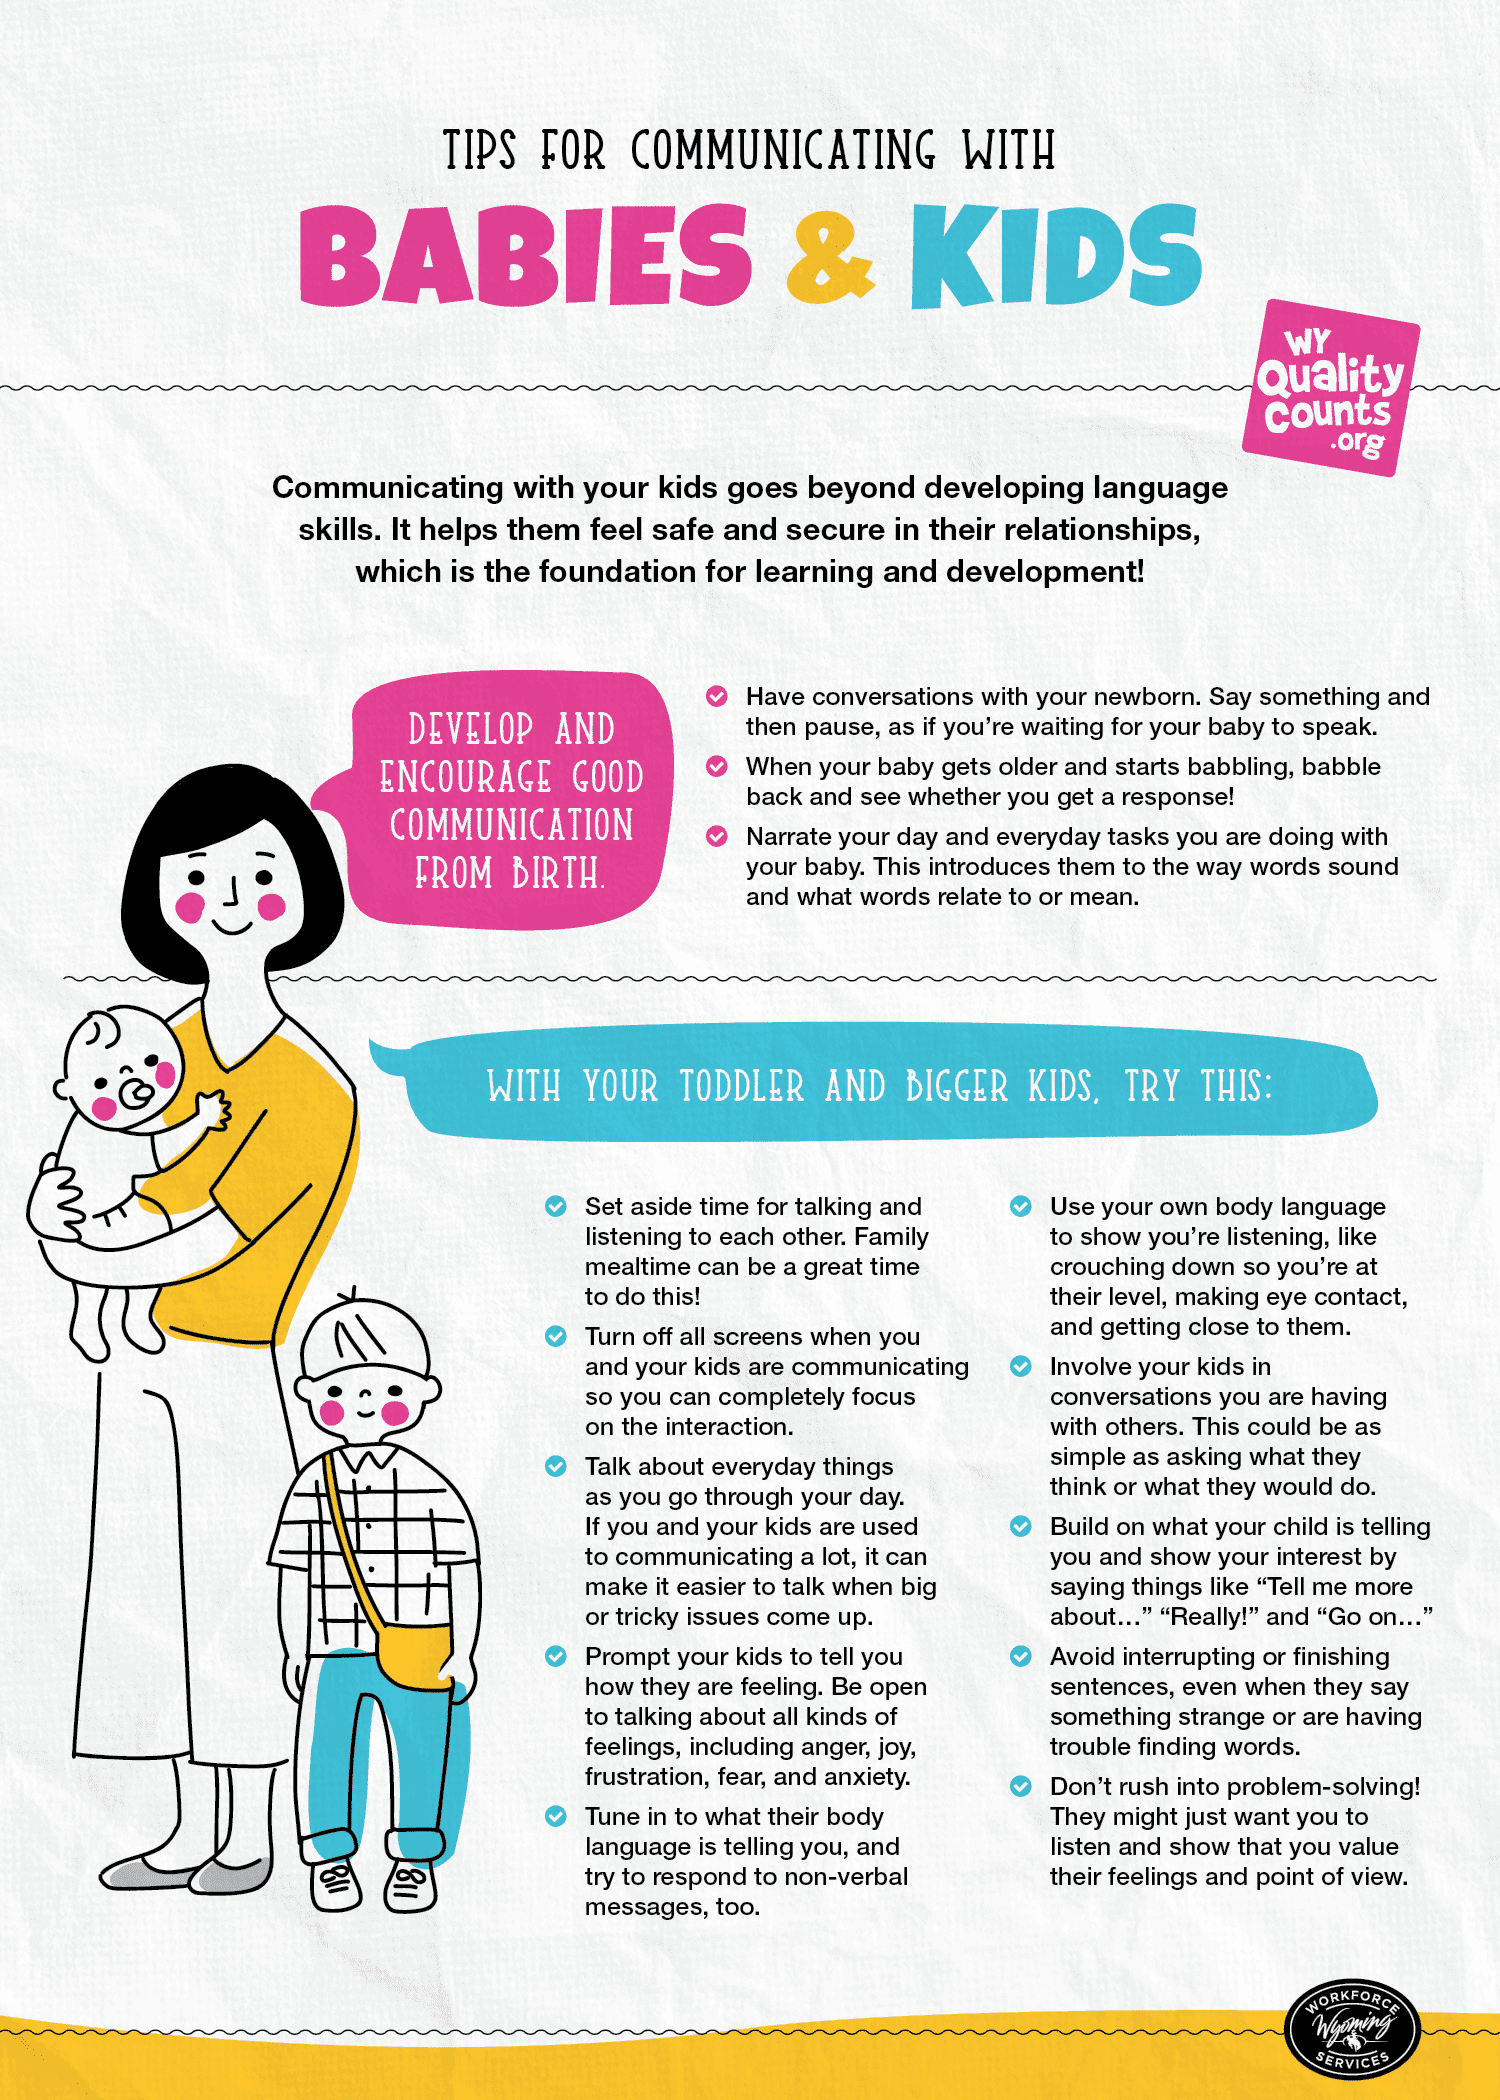 Tips for Communicating with Kids & Babies